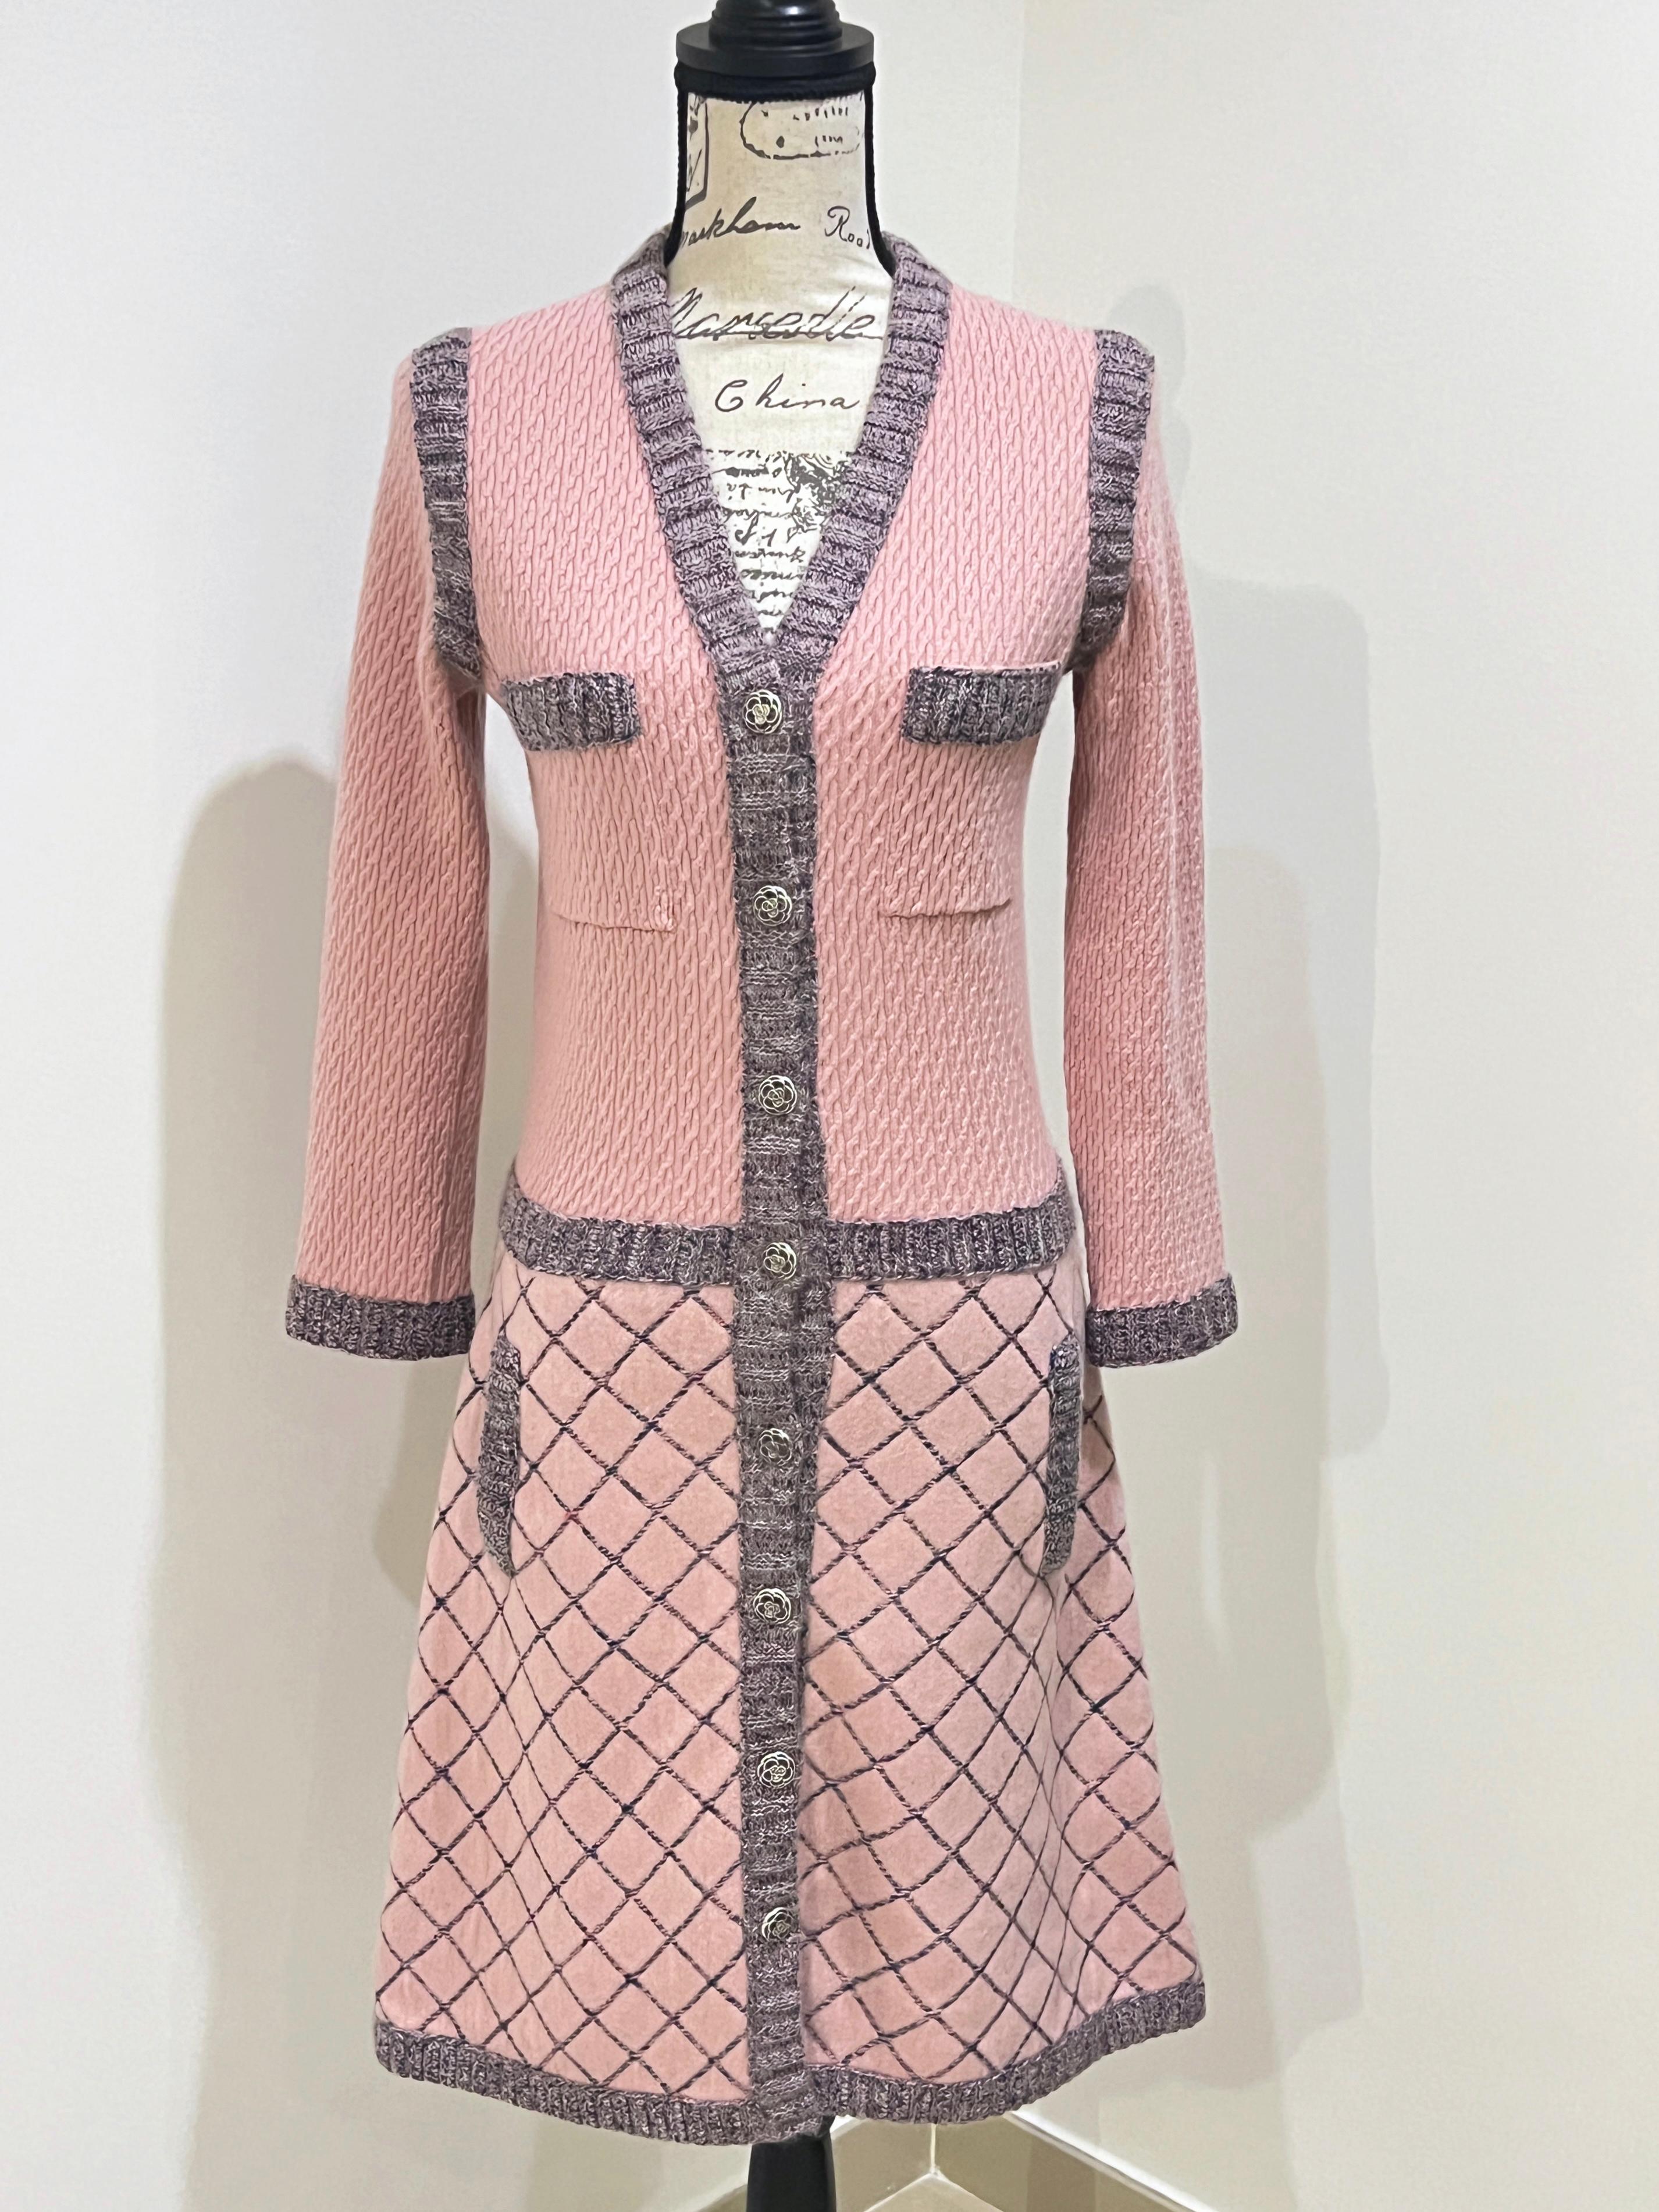 Chanel Iconic Coco Brasserie Quilted Jacket Dress For Sale 9